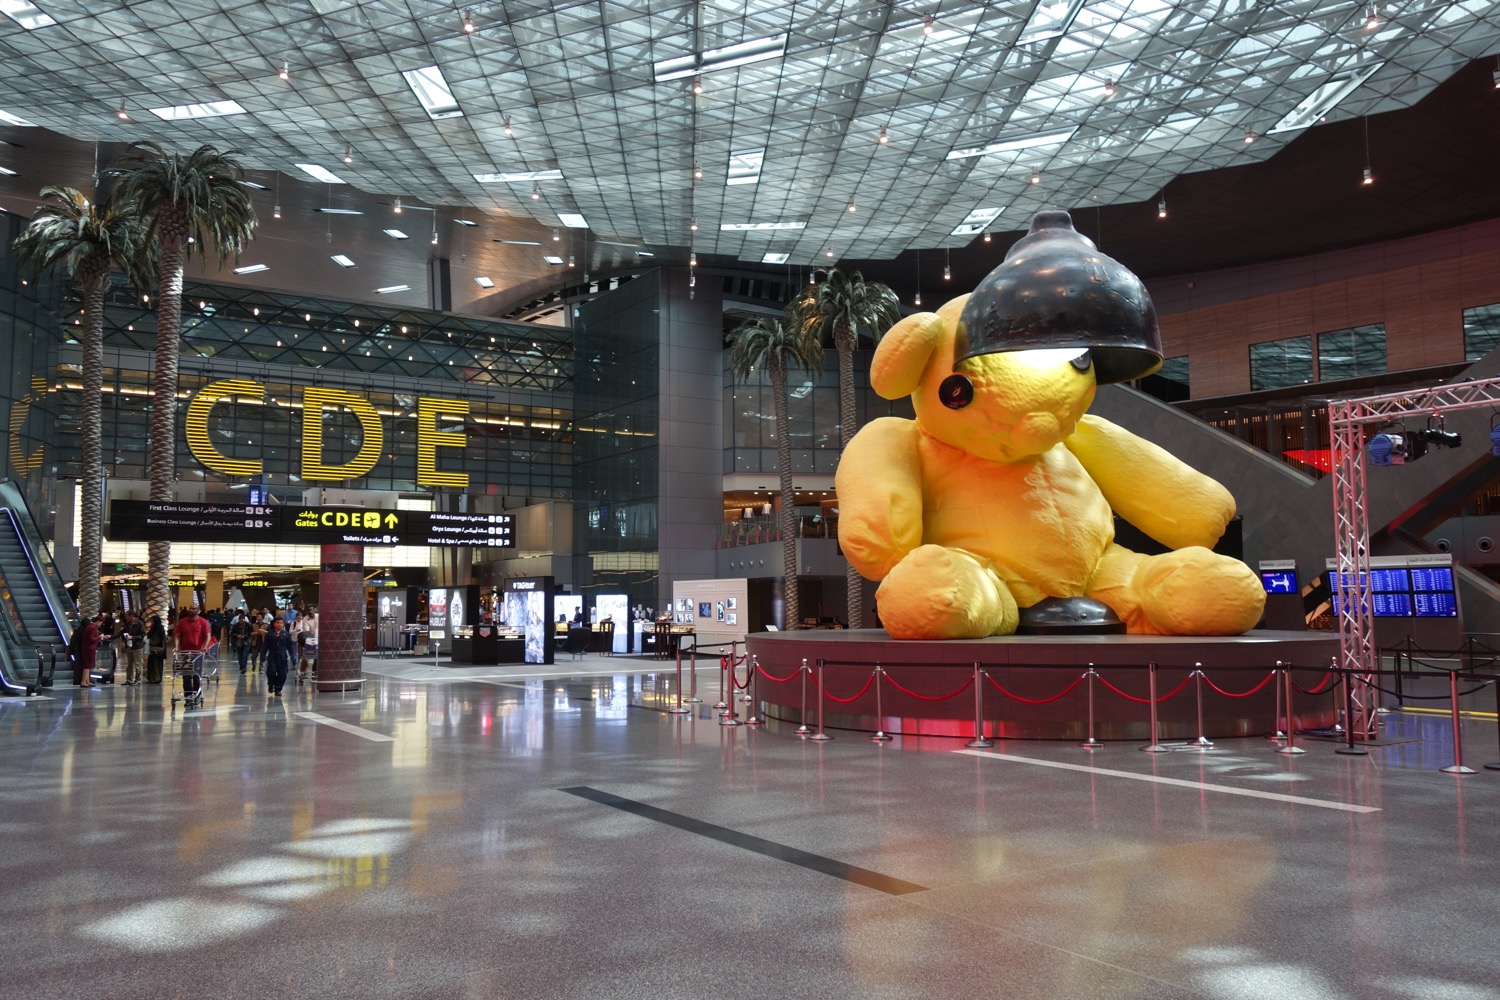 a large stuffed bear in a large building